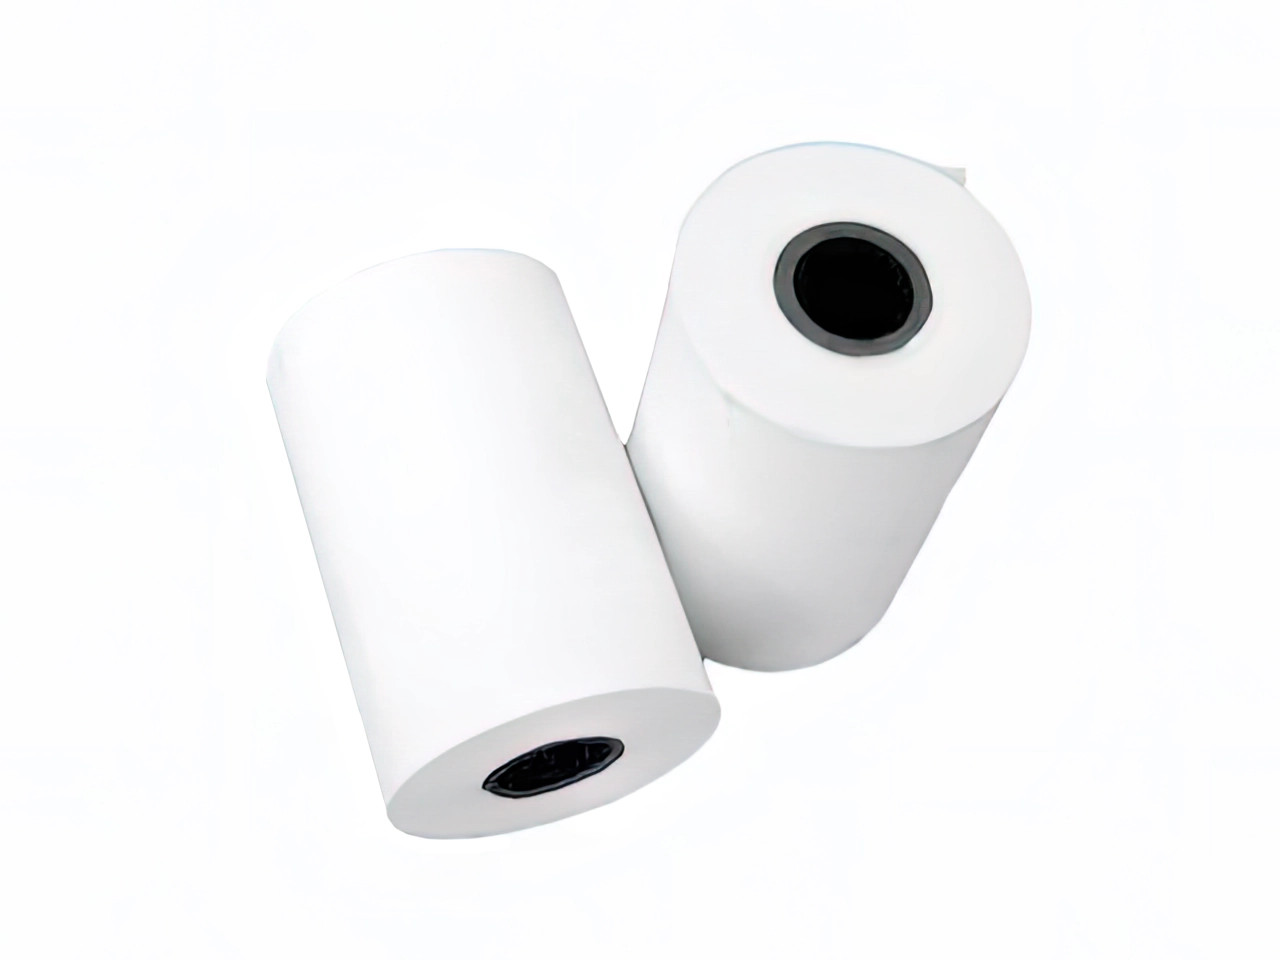 https://cdn11.bigcommerce.com/s-cunytmedtv/images/stencil/original/products/4445/7881/ingenico_move_5000_thermal_paper_rolls__89516.1699638038.jpg?c=2